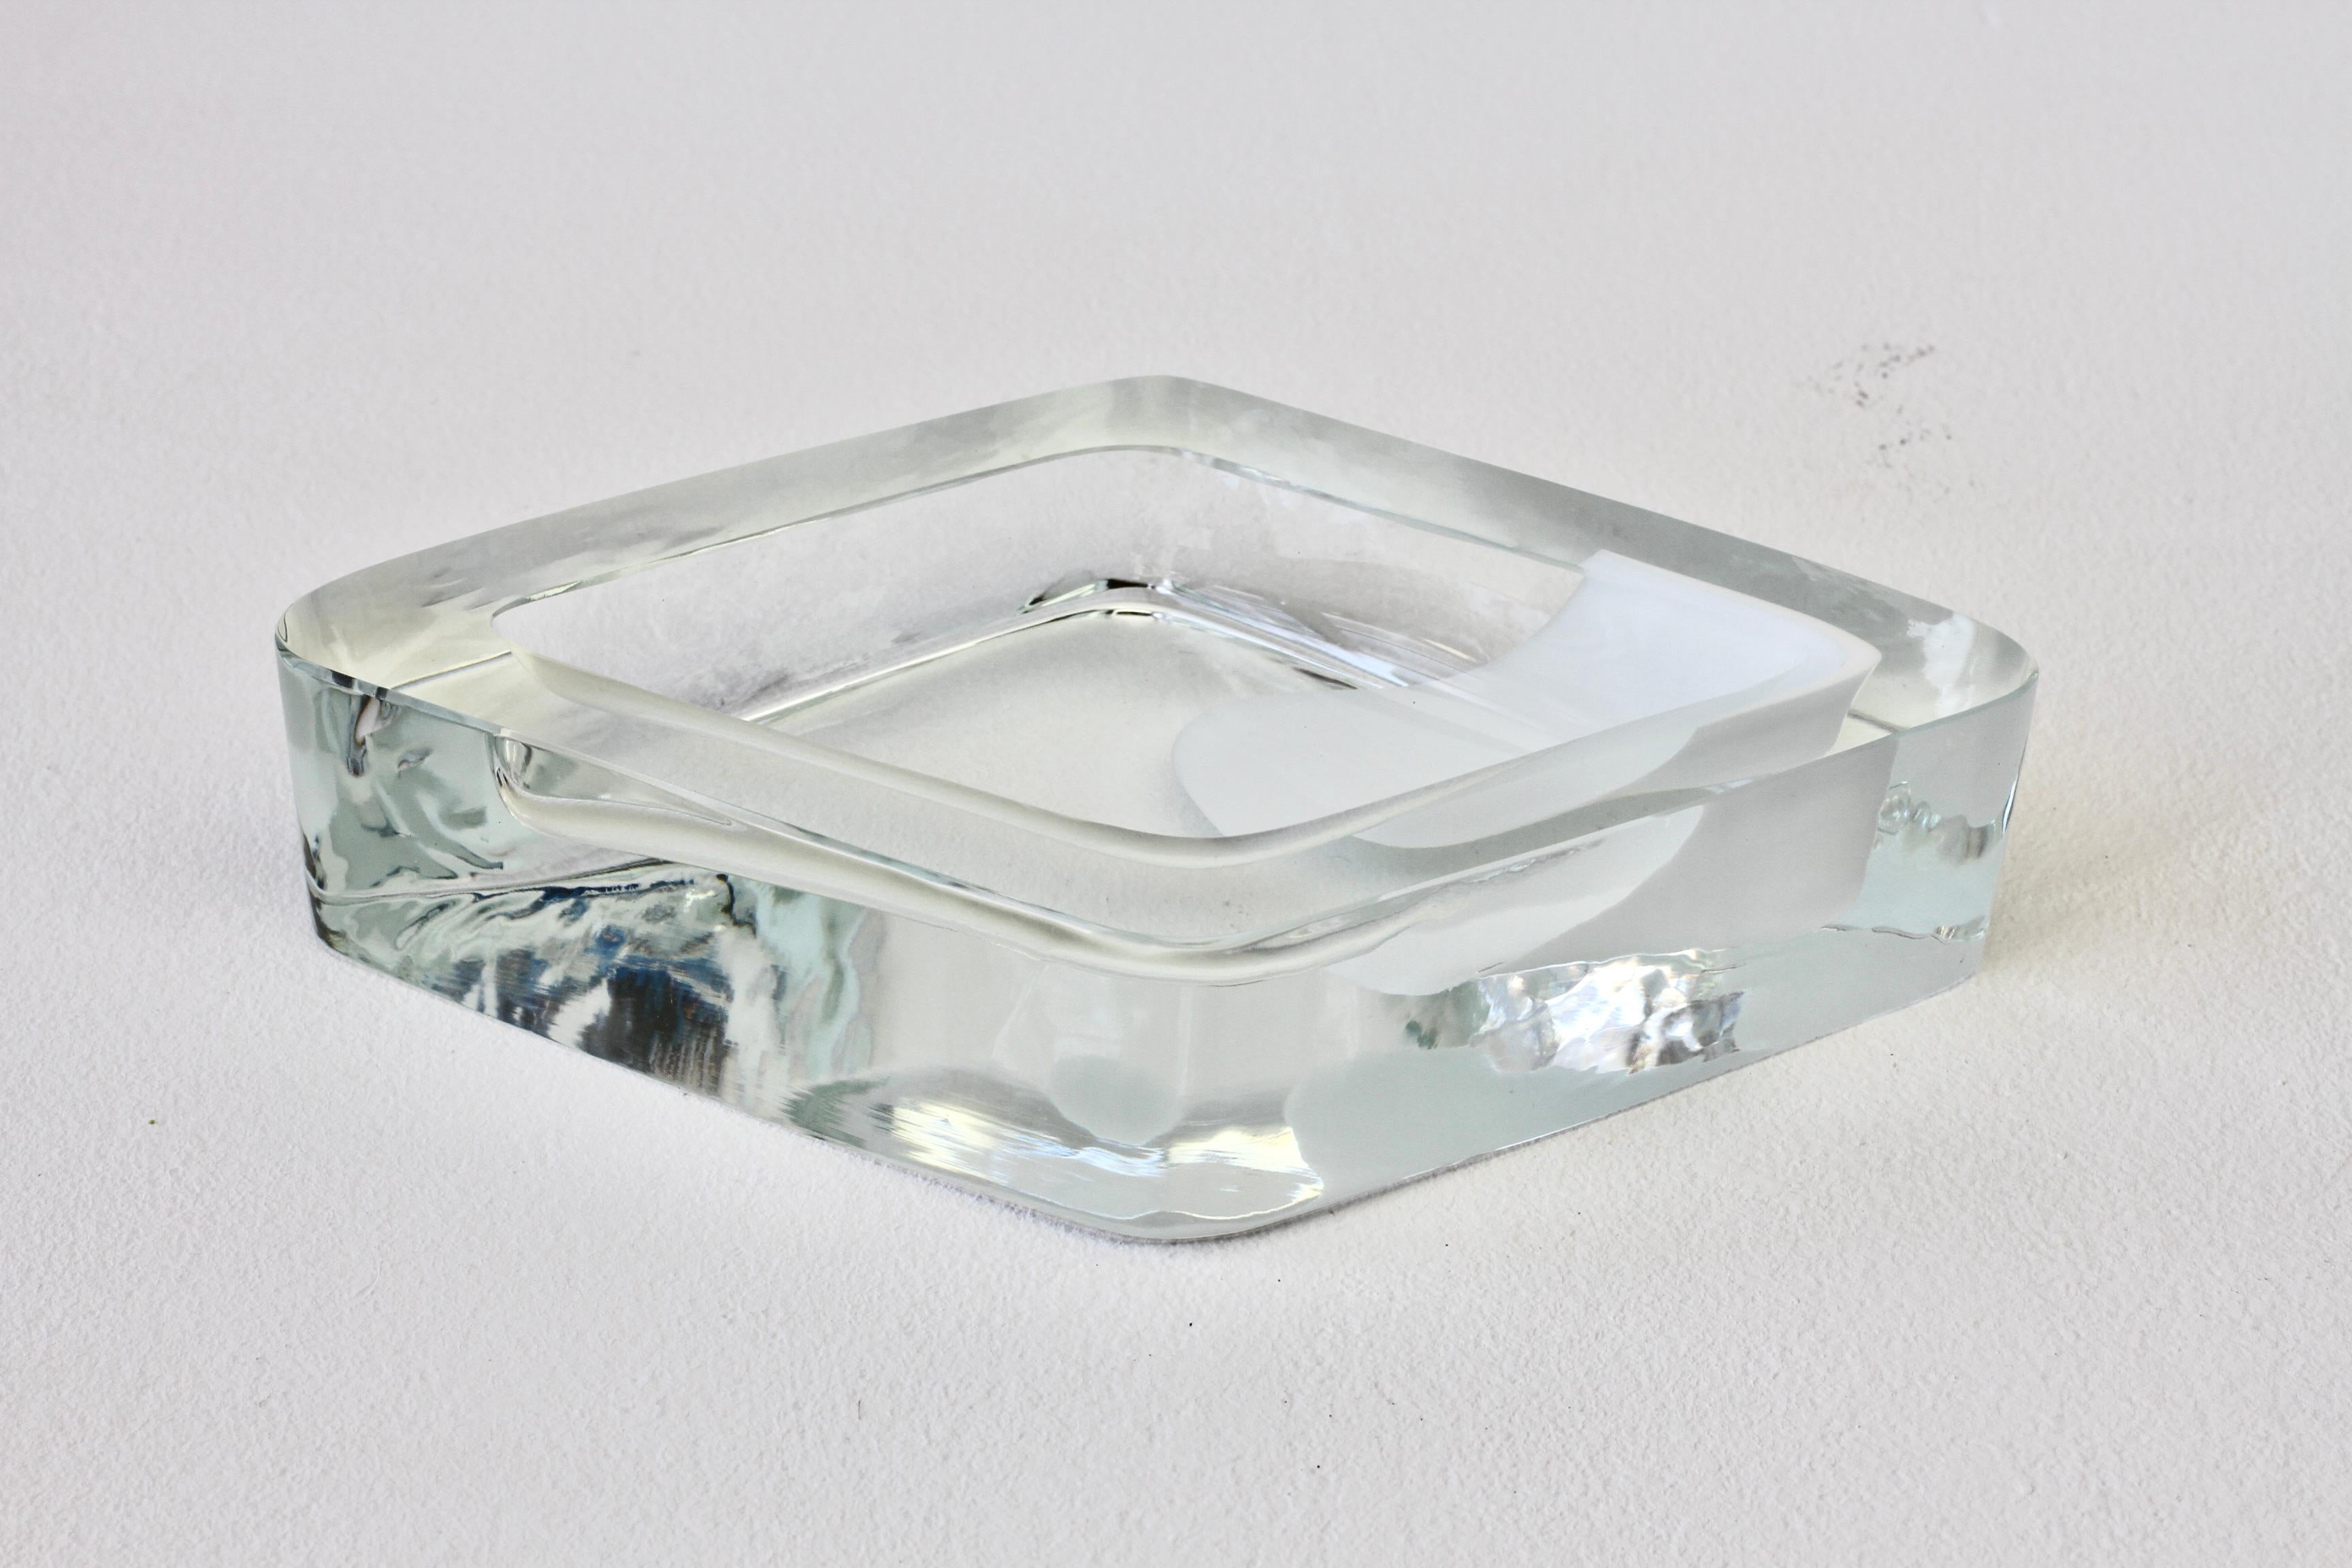 Large Cenedese Italian Rhombus White and Clear Murano Glass Bowl, Dish, Ashtray For Sale 3